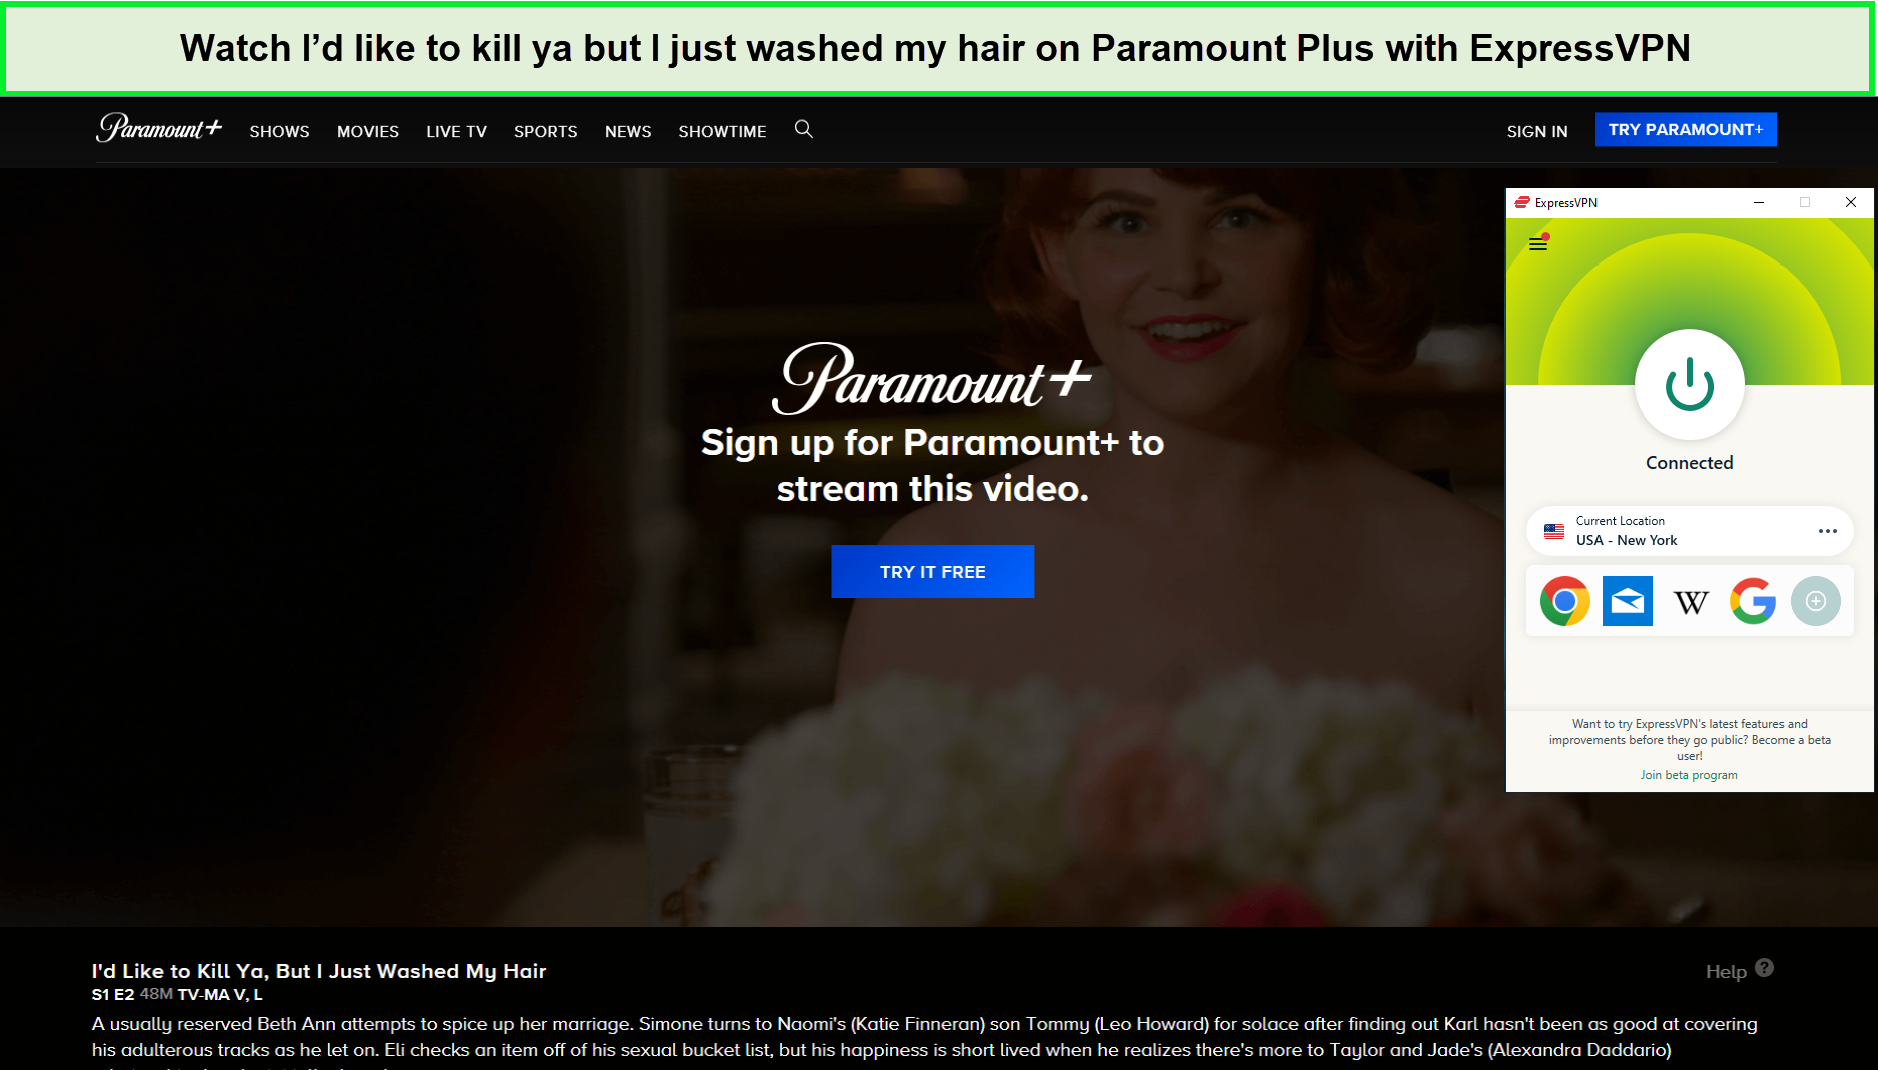 Watch-Id-like-to-kill-ya-but-I-just-washed-my-hair-in-Hong Kongon-Paramount-Plus-with-ExpressVPN